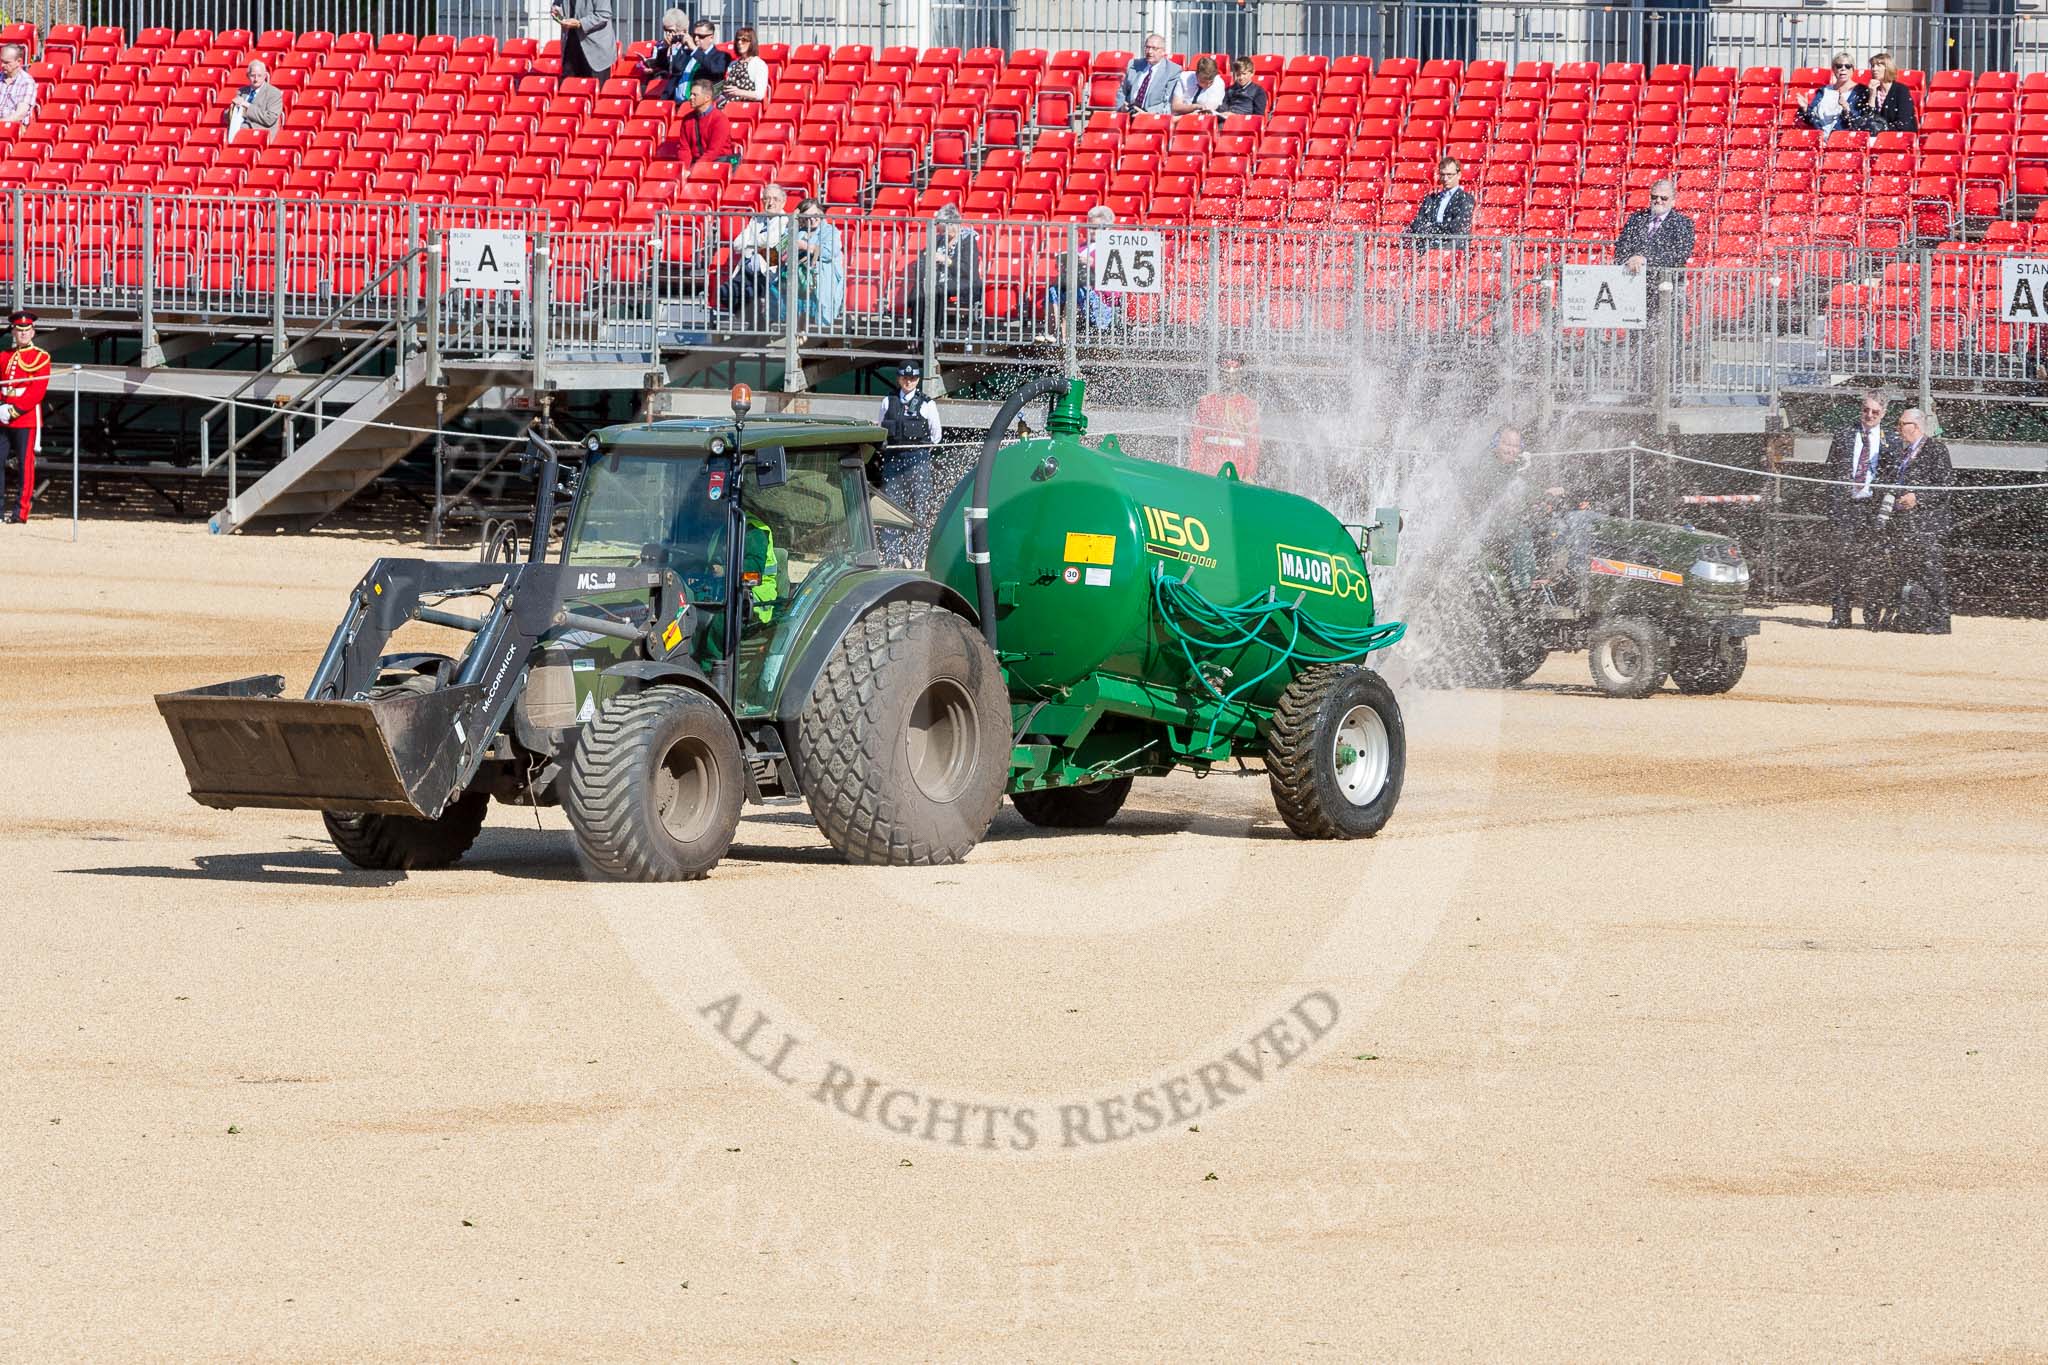 Horse Guards Parade before the event: The dry and dusty ground is watered and levelled in preparation for the parade.